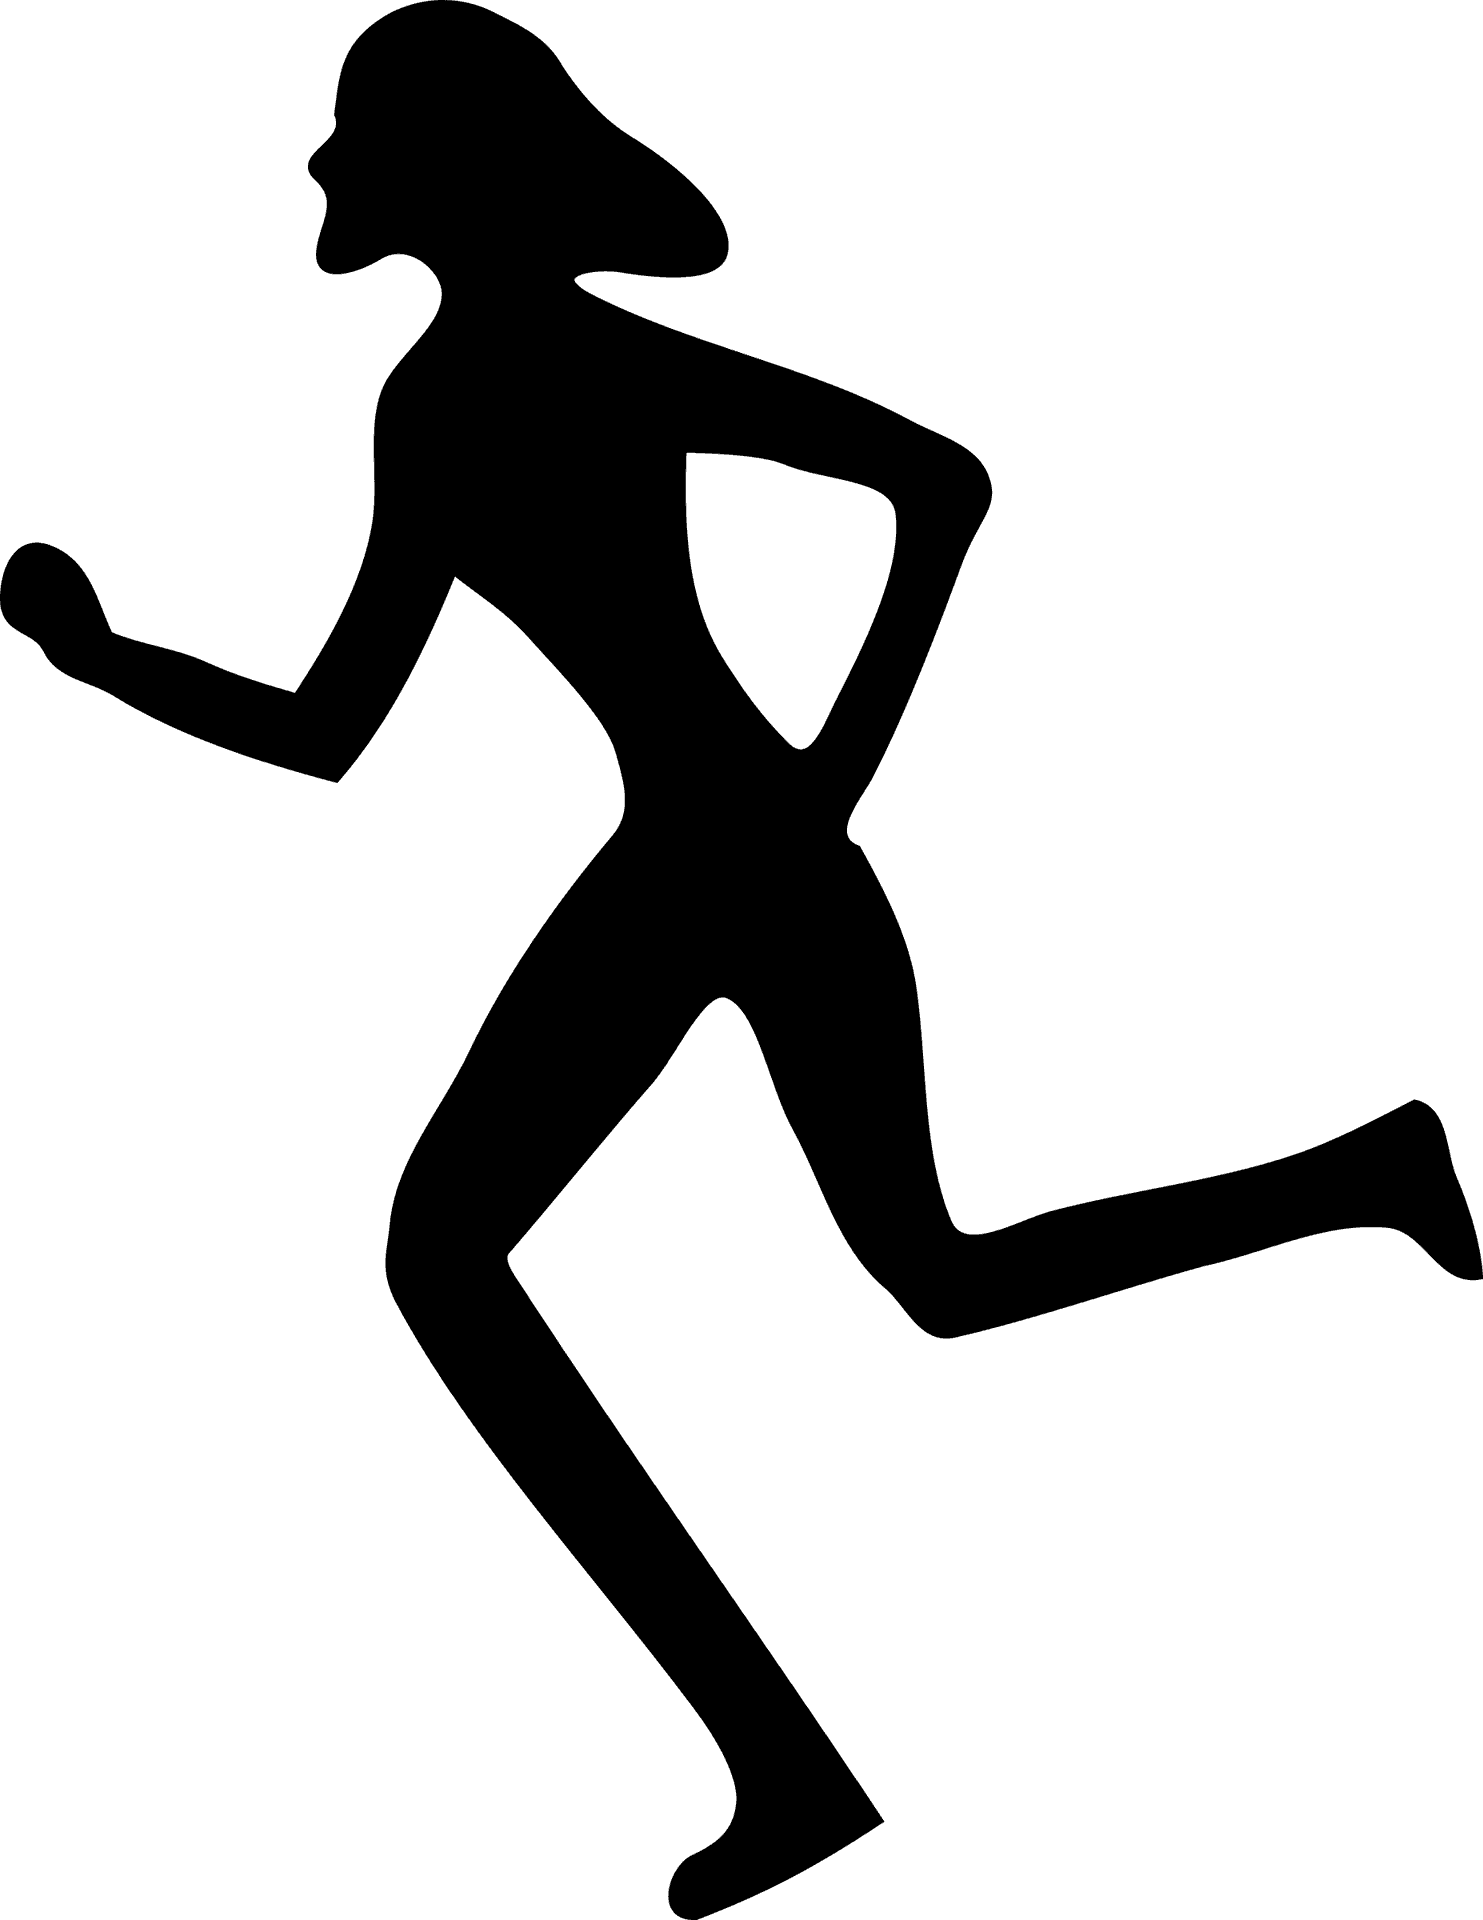 Female Runner Silhouette Graphic PNG